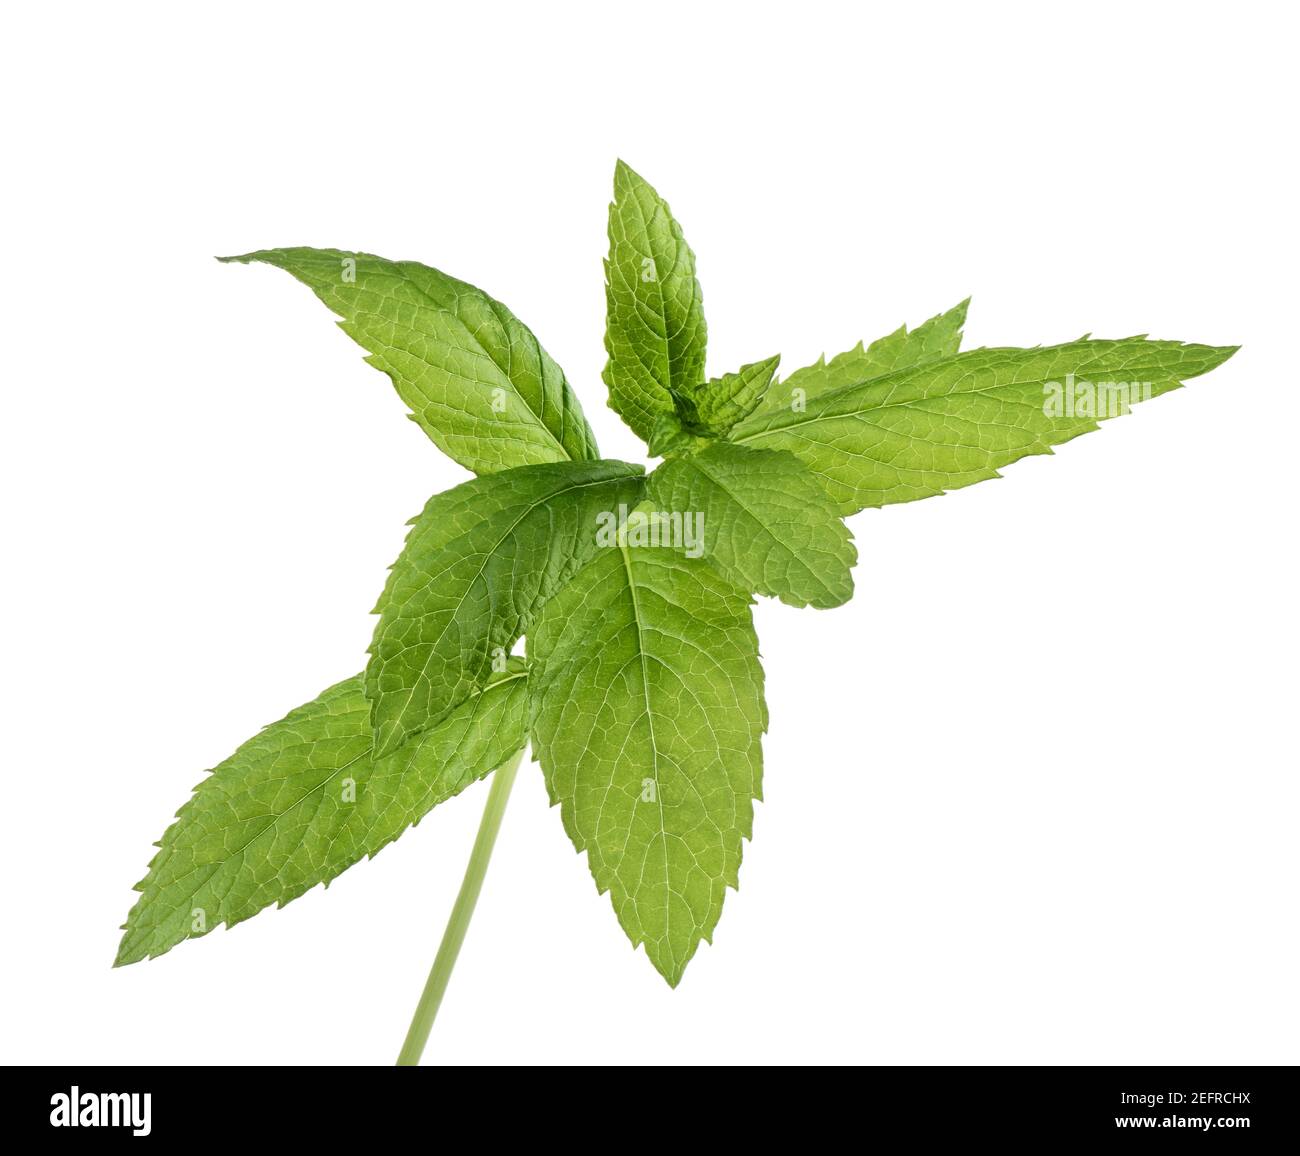 Peppermint plant green leaves closeup. Mint and spearmint relative. Isolated on white studio background. Stock Photo